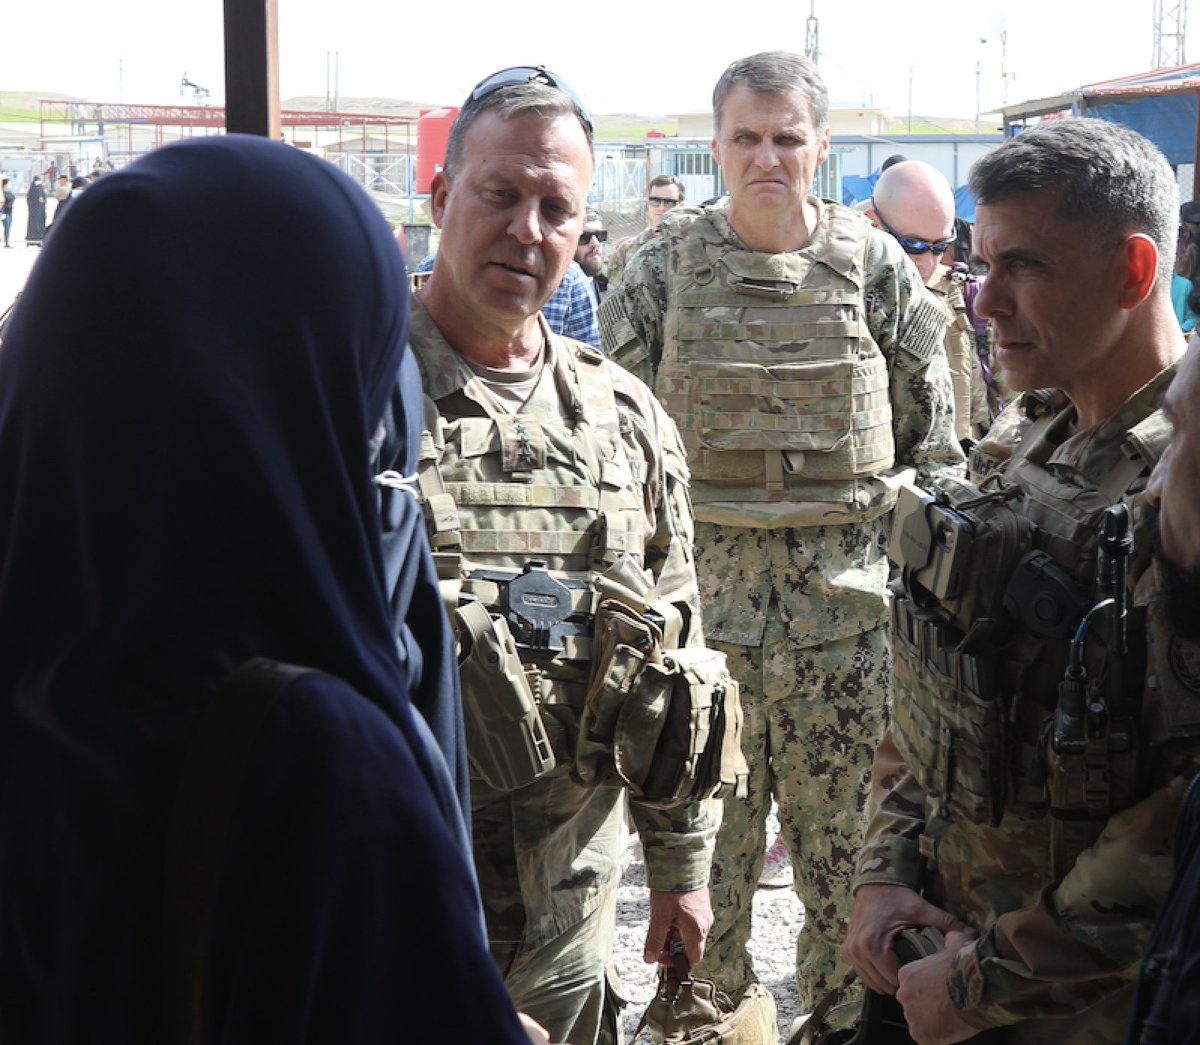 U.S. Central Command:General Kurilla traveled to northeast Syria where he visited sites critical to the ongoing effort to ensure the enduring defeat of ISIS